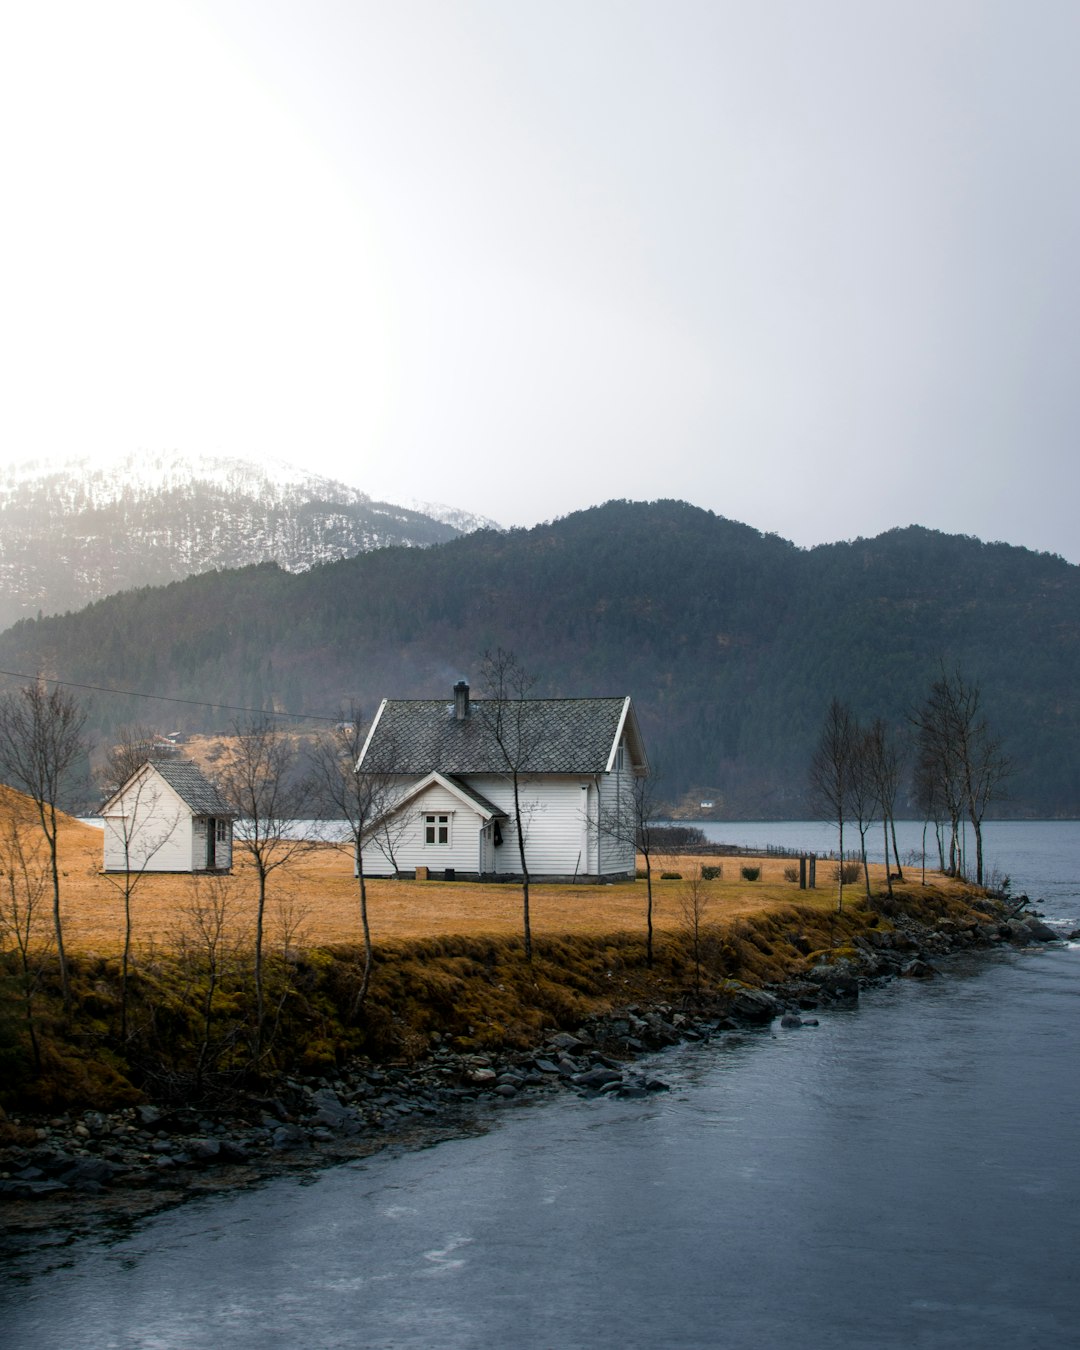 houses on shore near body of water